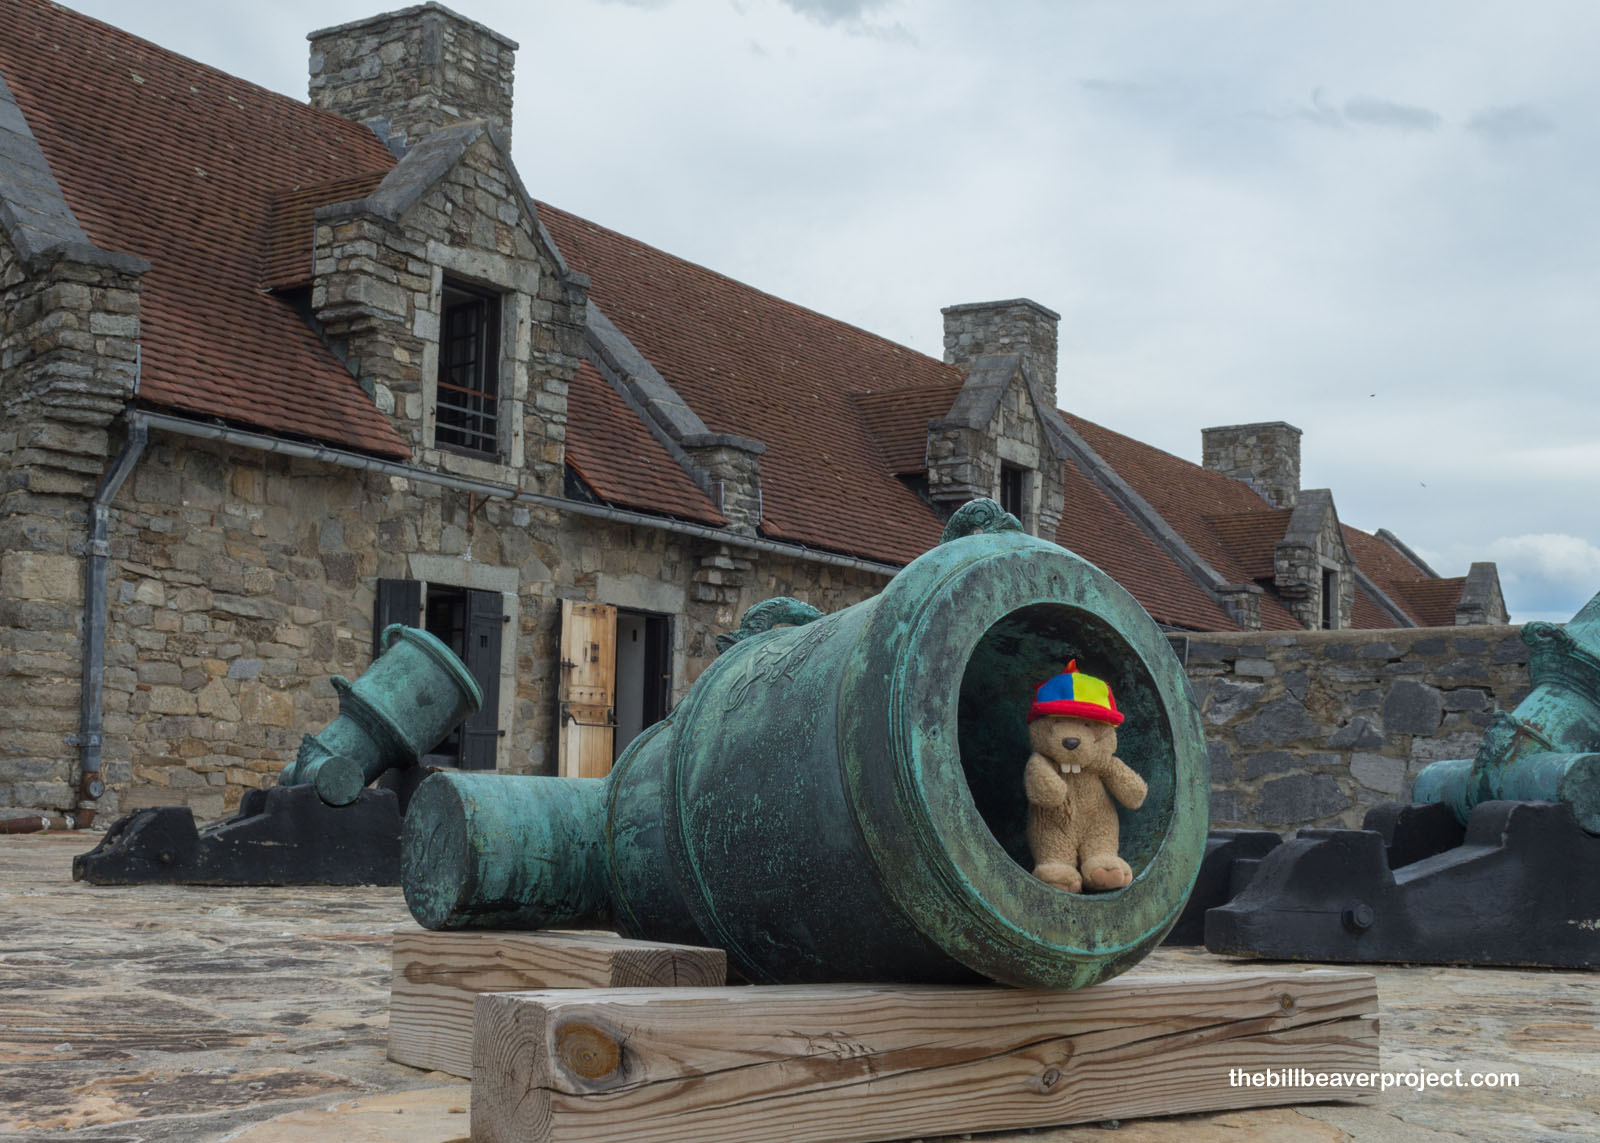 Period-authentic cannons shipped from England!